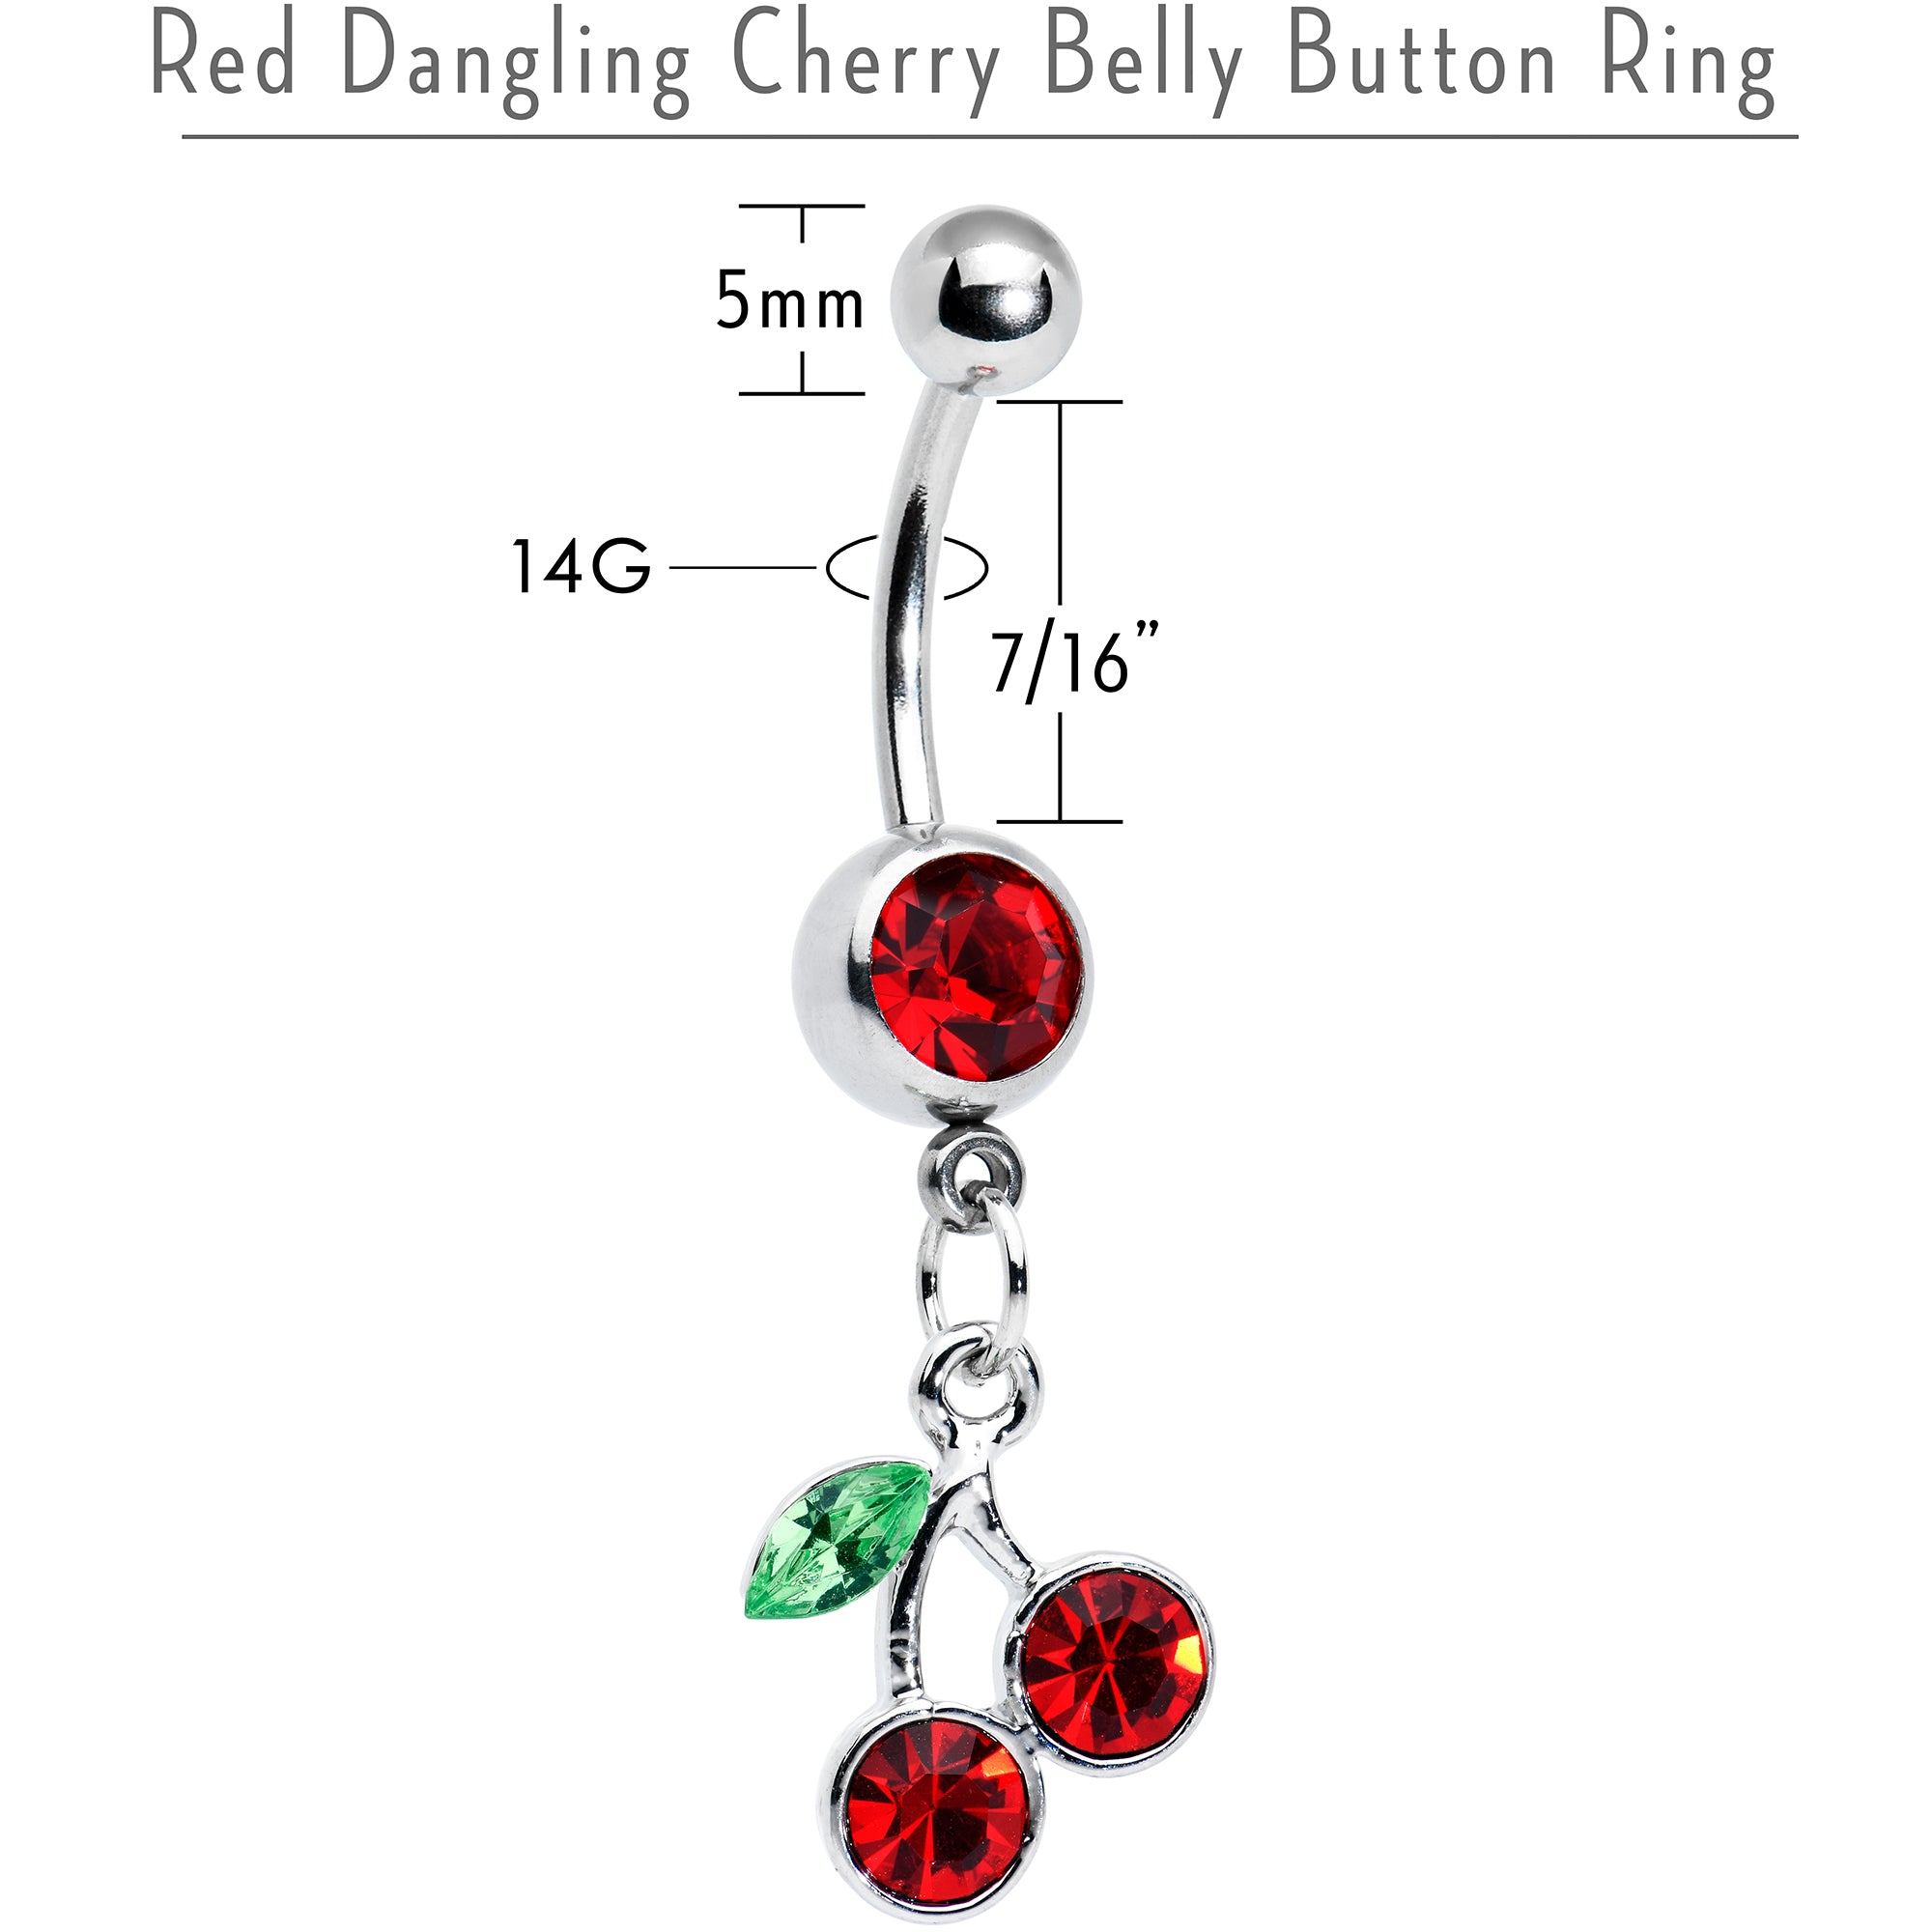 Find Fake Piercing Jewelry Ideas For Your Belly Button